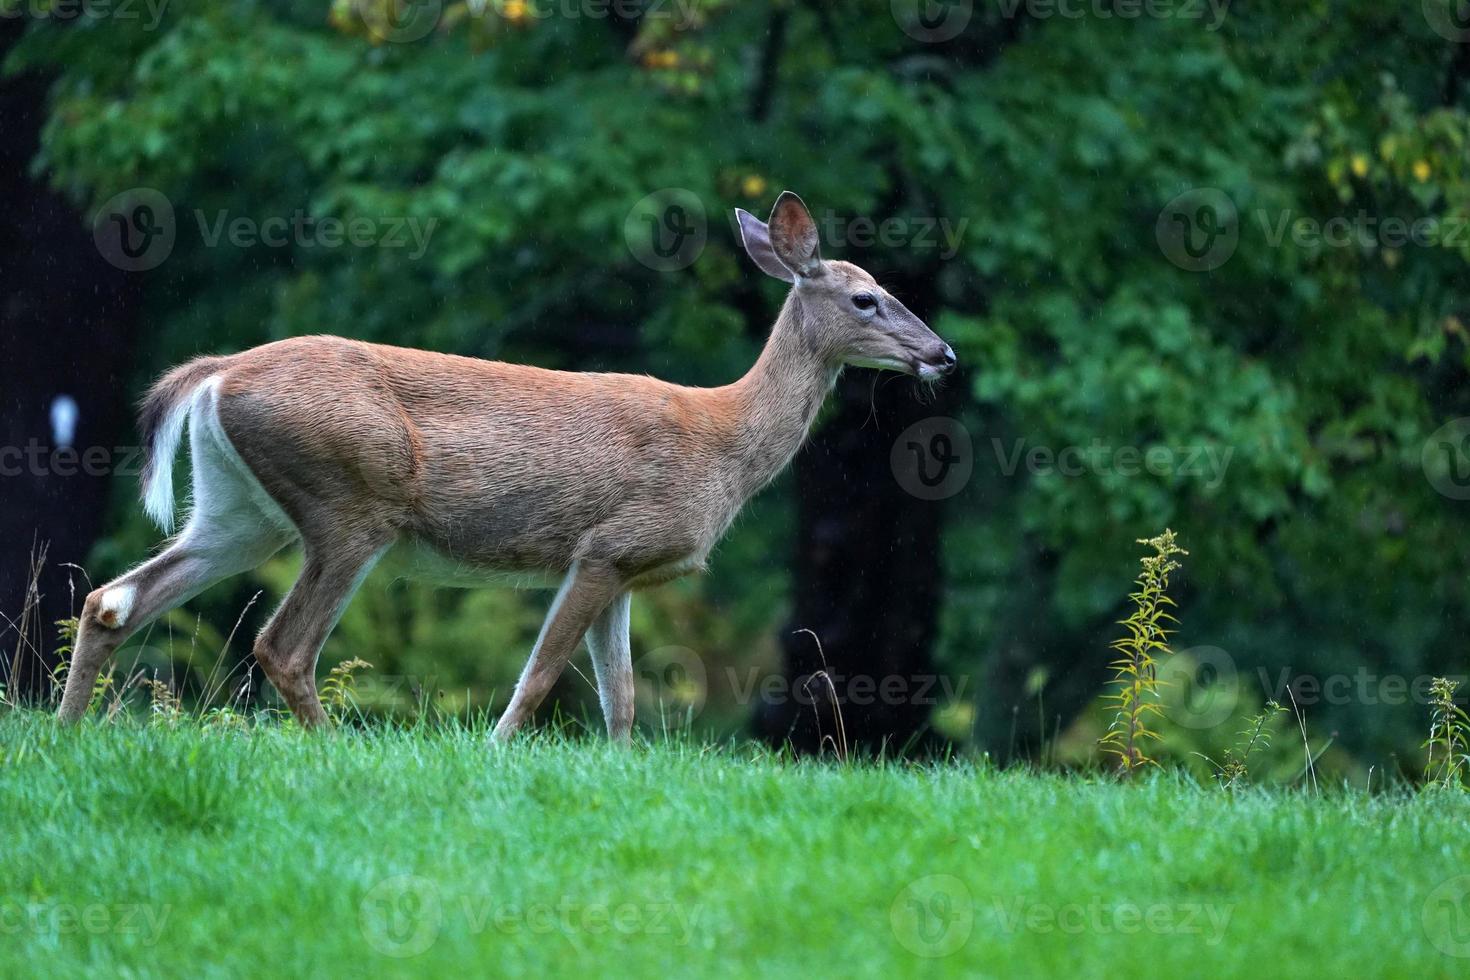 white tail deers under the rain near the houses in new york state county countryside photo